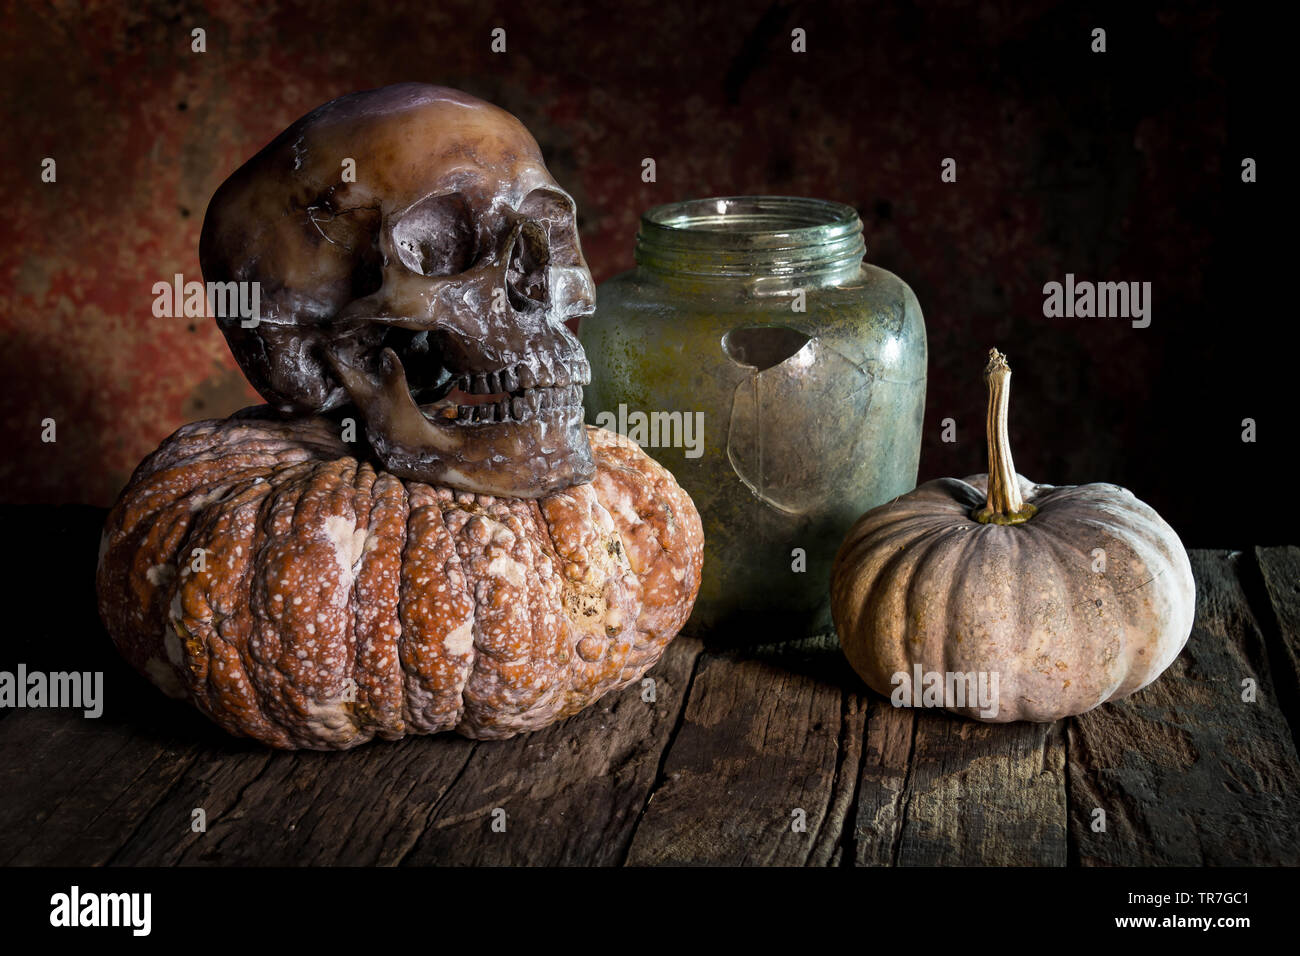 ill Life with Pumpkin and Skull Stock Photo